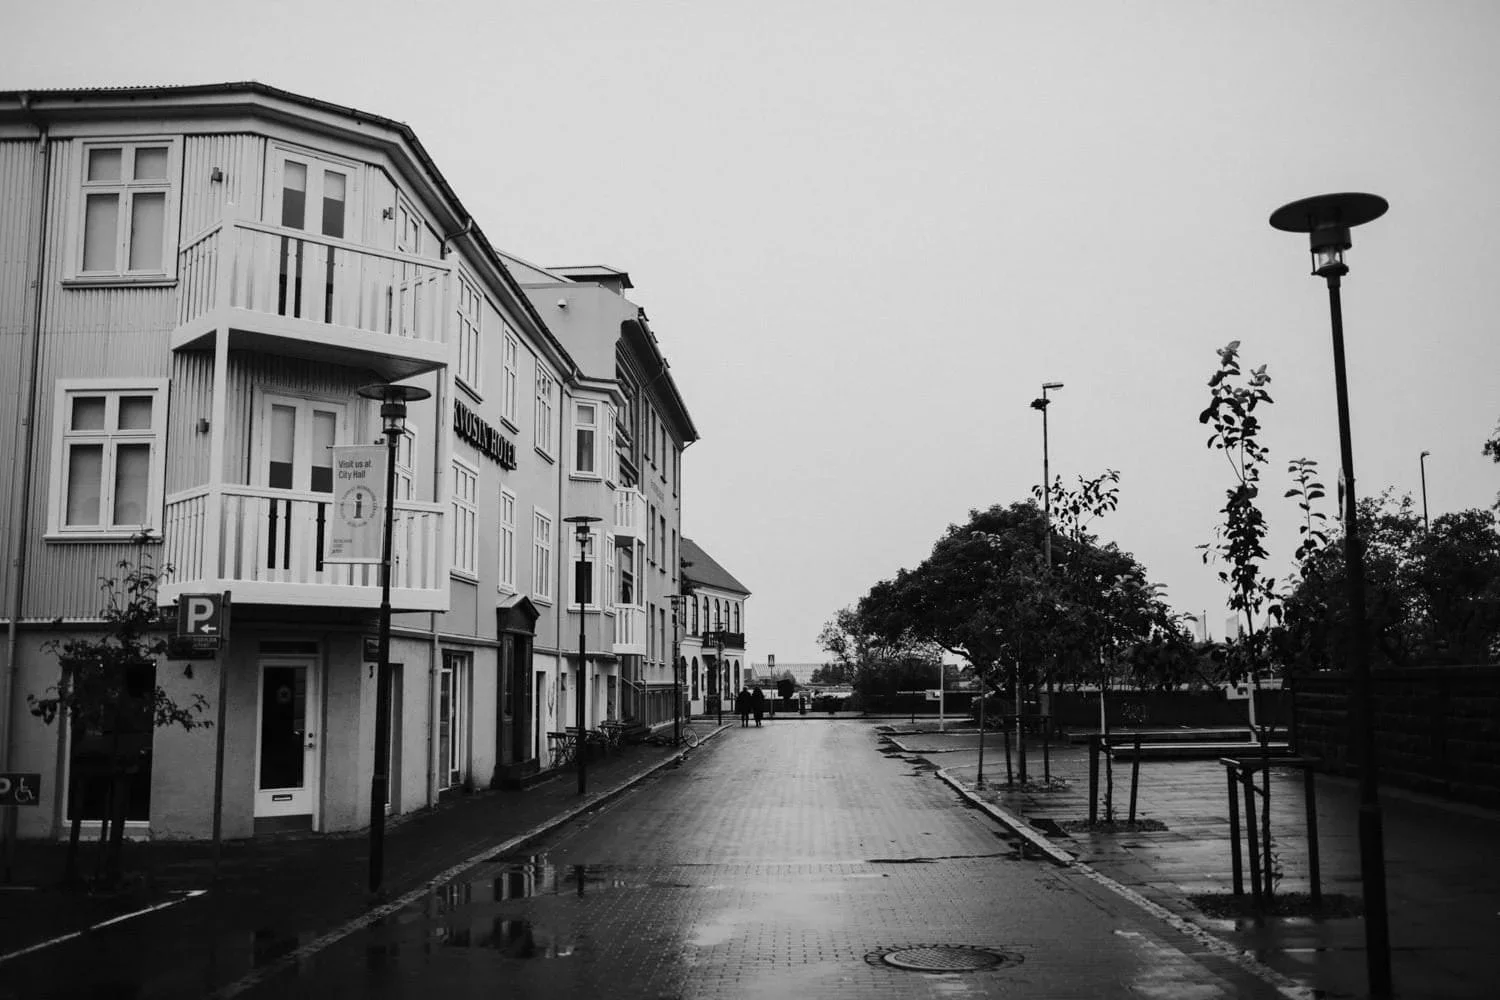 The streets of Reykjavik, Iceland, outside of Idno Theatre.